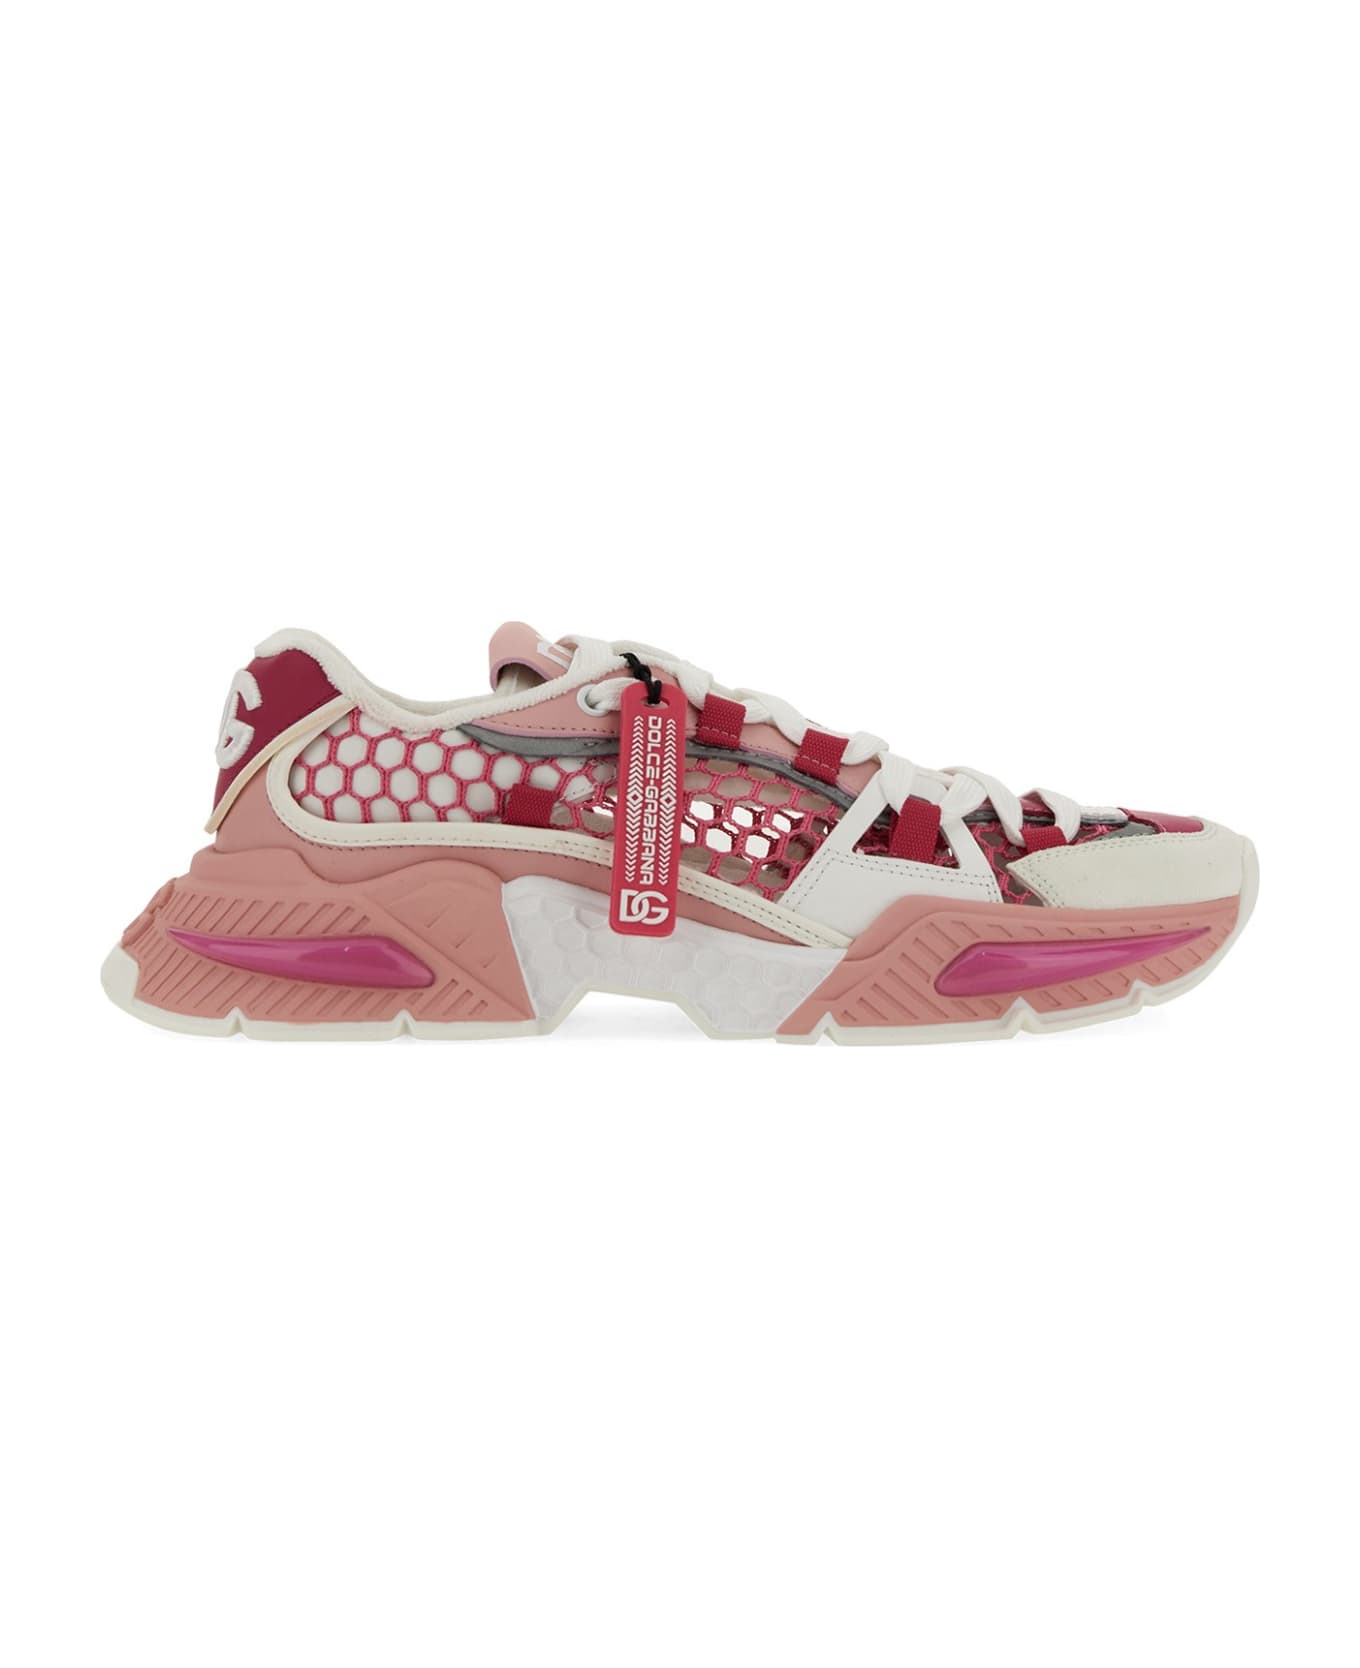 Dolce & Gabbana Airmaster Sneakers - WHITE/PINK